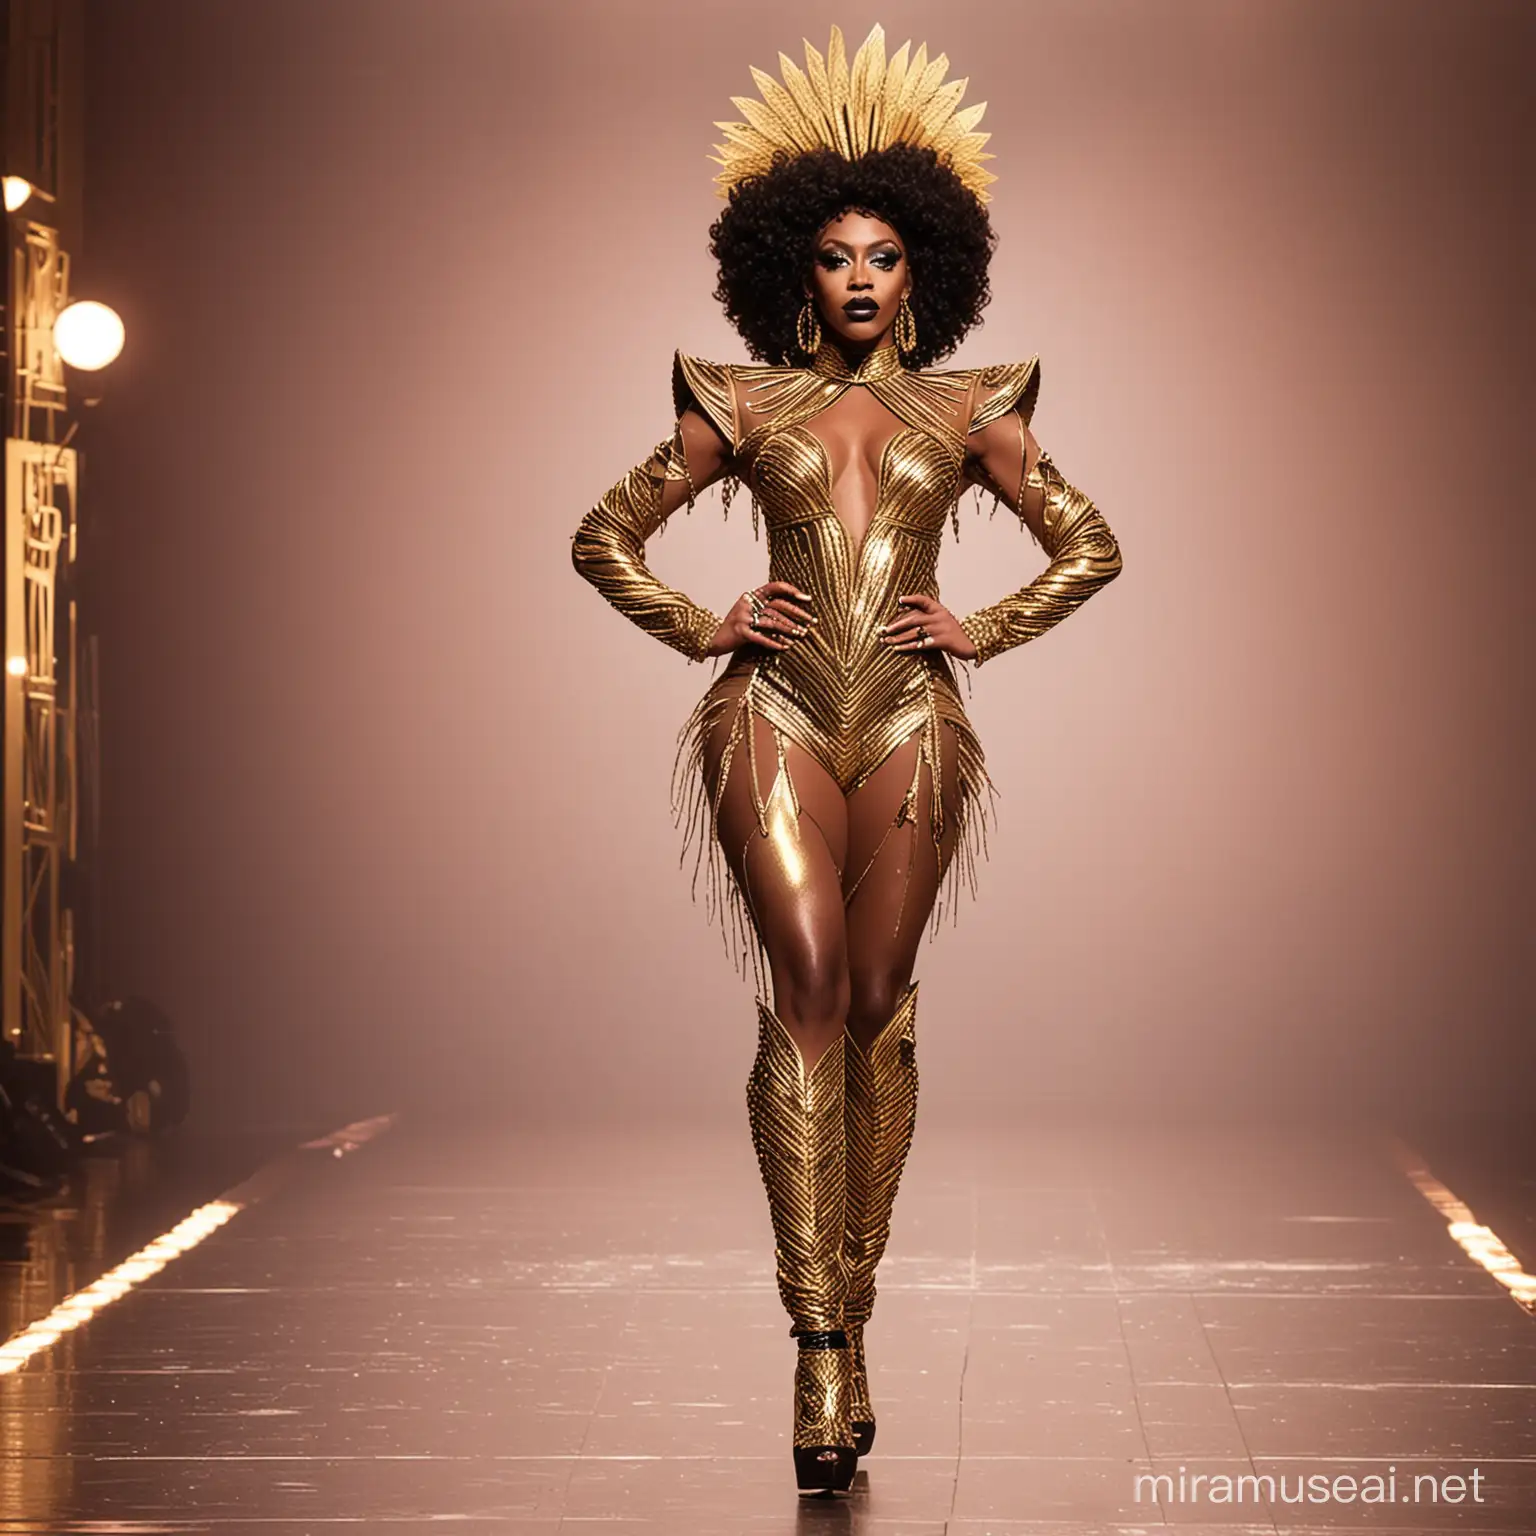 a full body image of a skinny african american drag queen walking on the Rupaul's Drag race runway wearing an outfit inspired by the prompt: black and gold